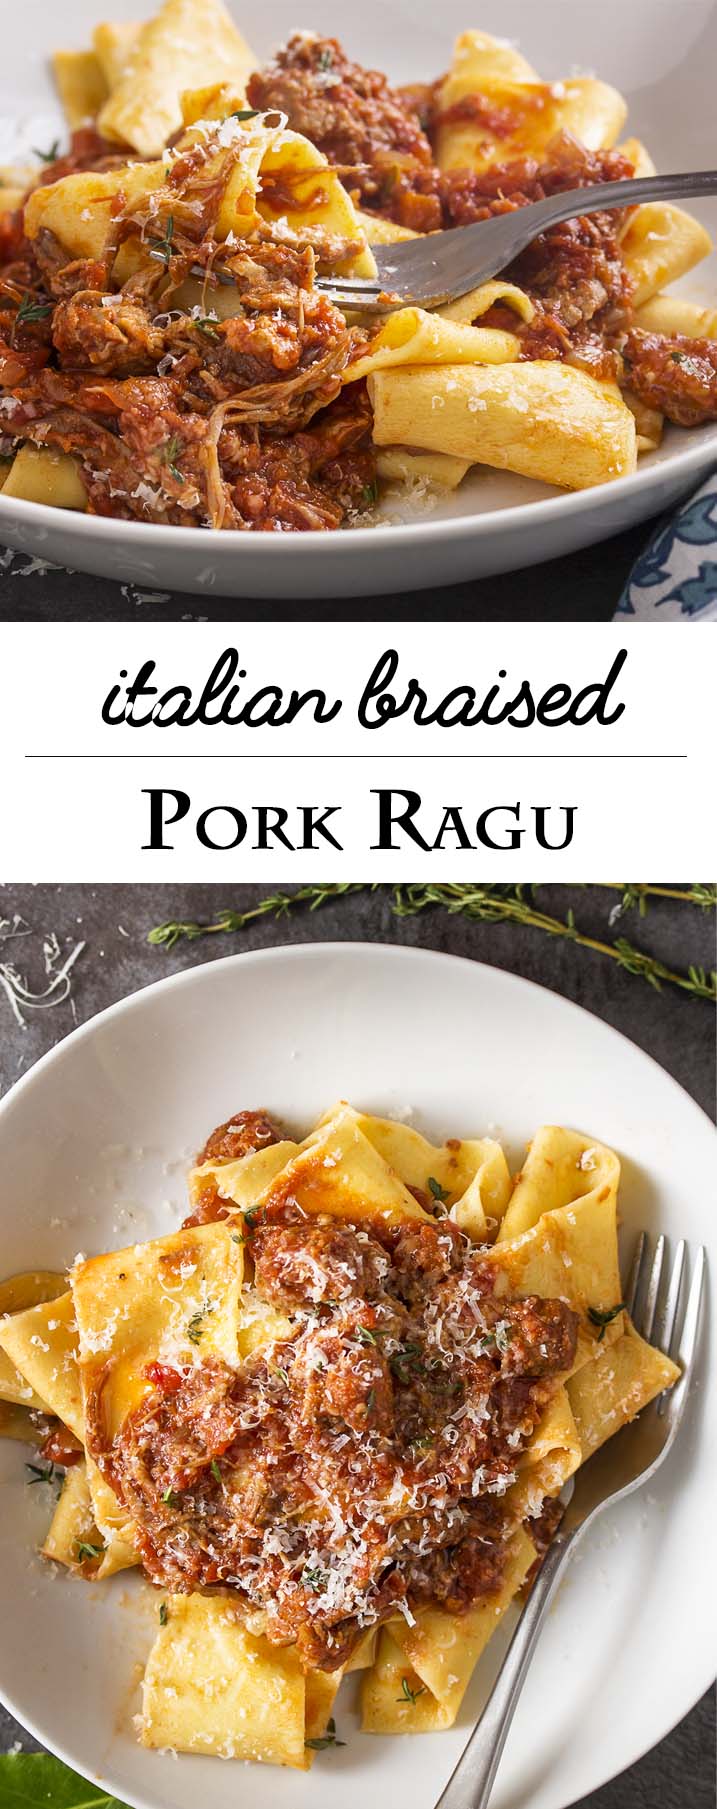 Italian comfort food of tomato, braised sausage, and pork shoulder ragu simmering on the stove is the perfect way to spend a chilly day. This pork ragu is easily doubled and freezes well. | justalittlebitofbacon.com